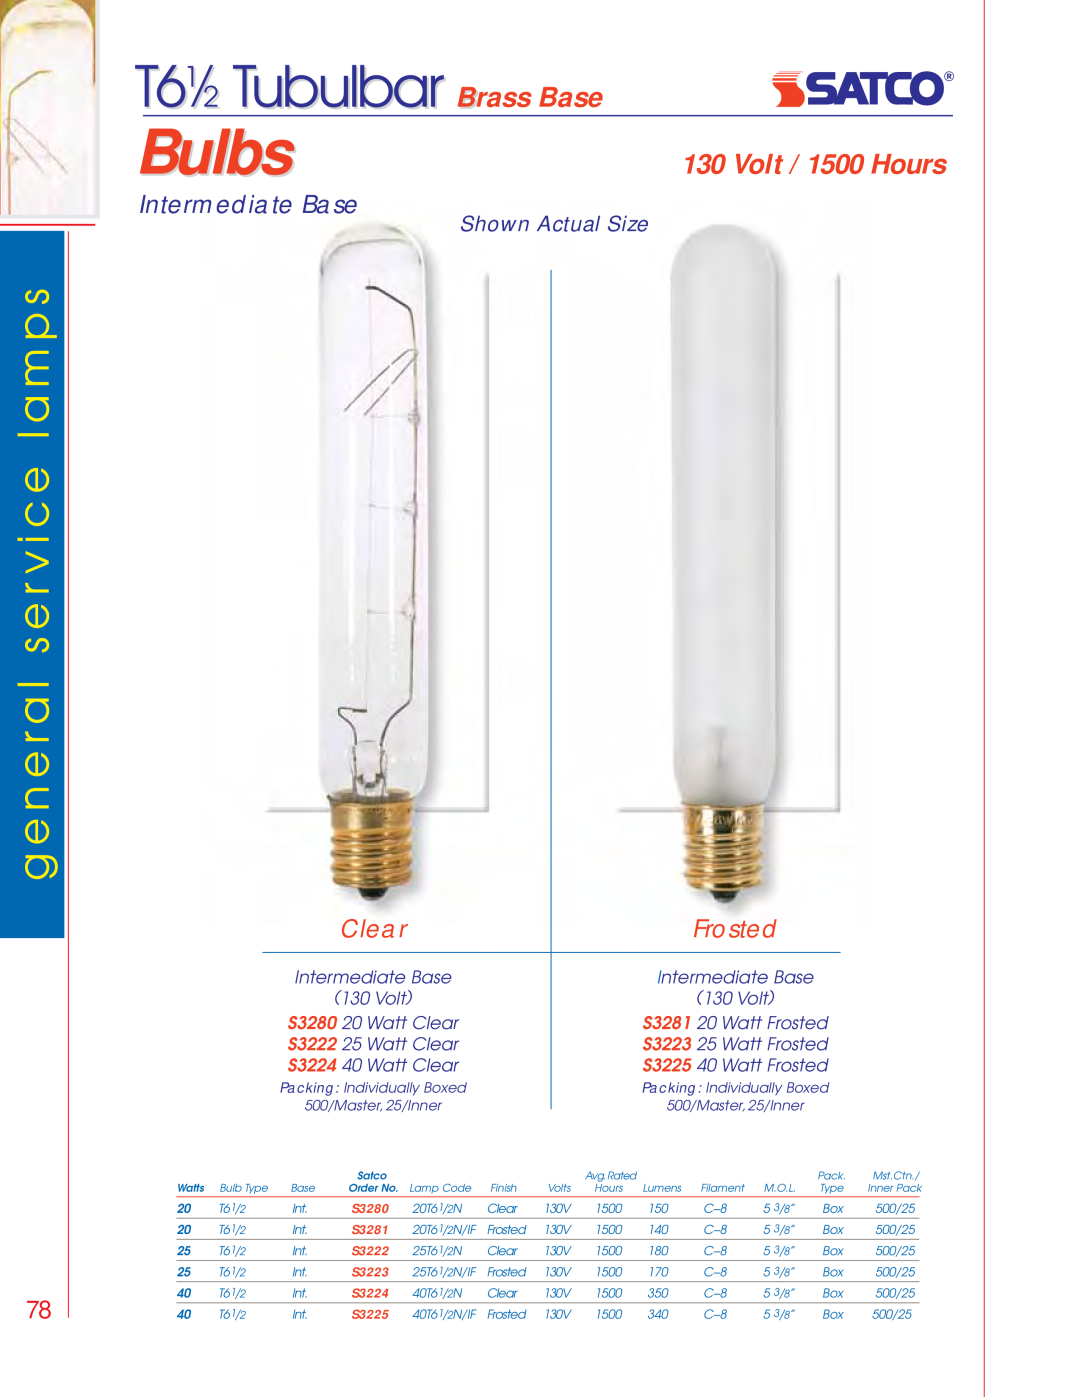 Satco Products S3692 Volt / 1500 Hours, Intermediate Base, Bulbs, T6 ⁄ Tubulbar, g e n e r a l s e r v i c e l a m p s 